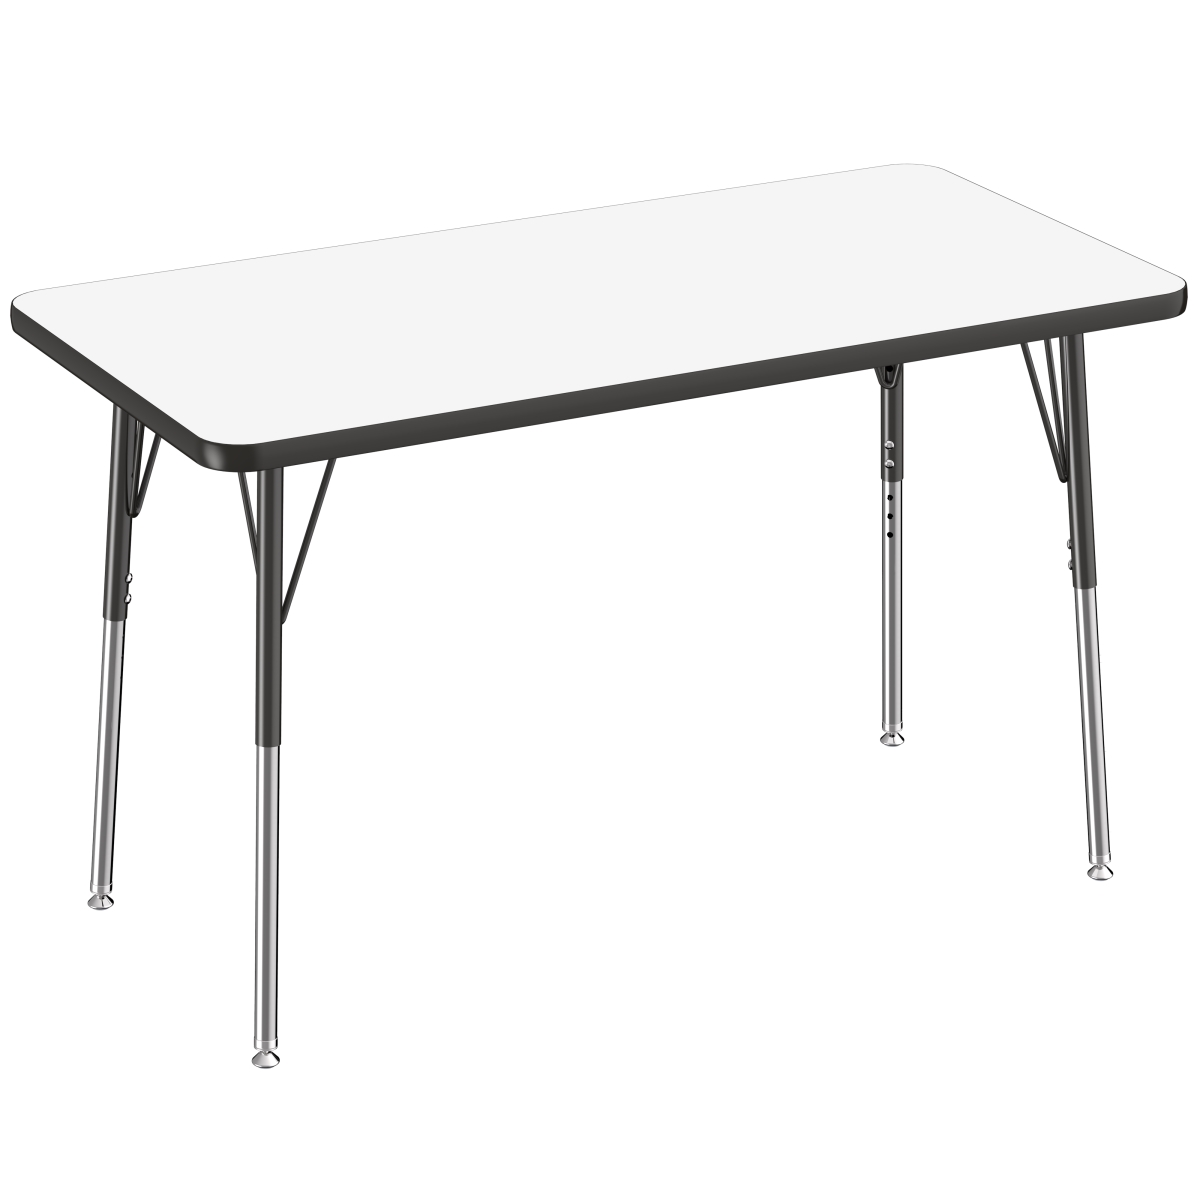 10160-debk 24 X 48 In. Rectangle Dry-erase Adjustable Activity Table With Standard Swivel - Black